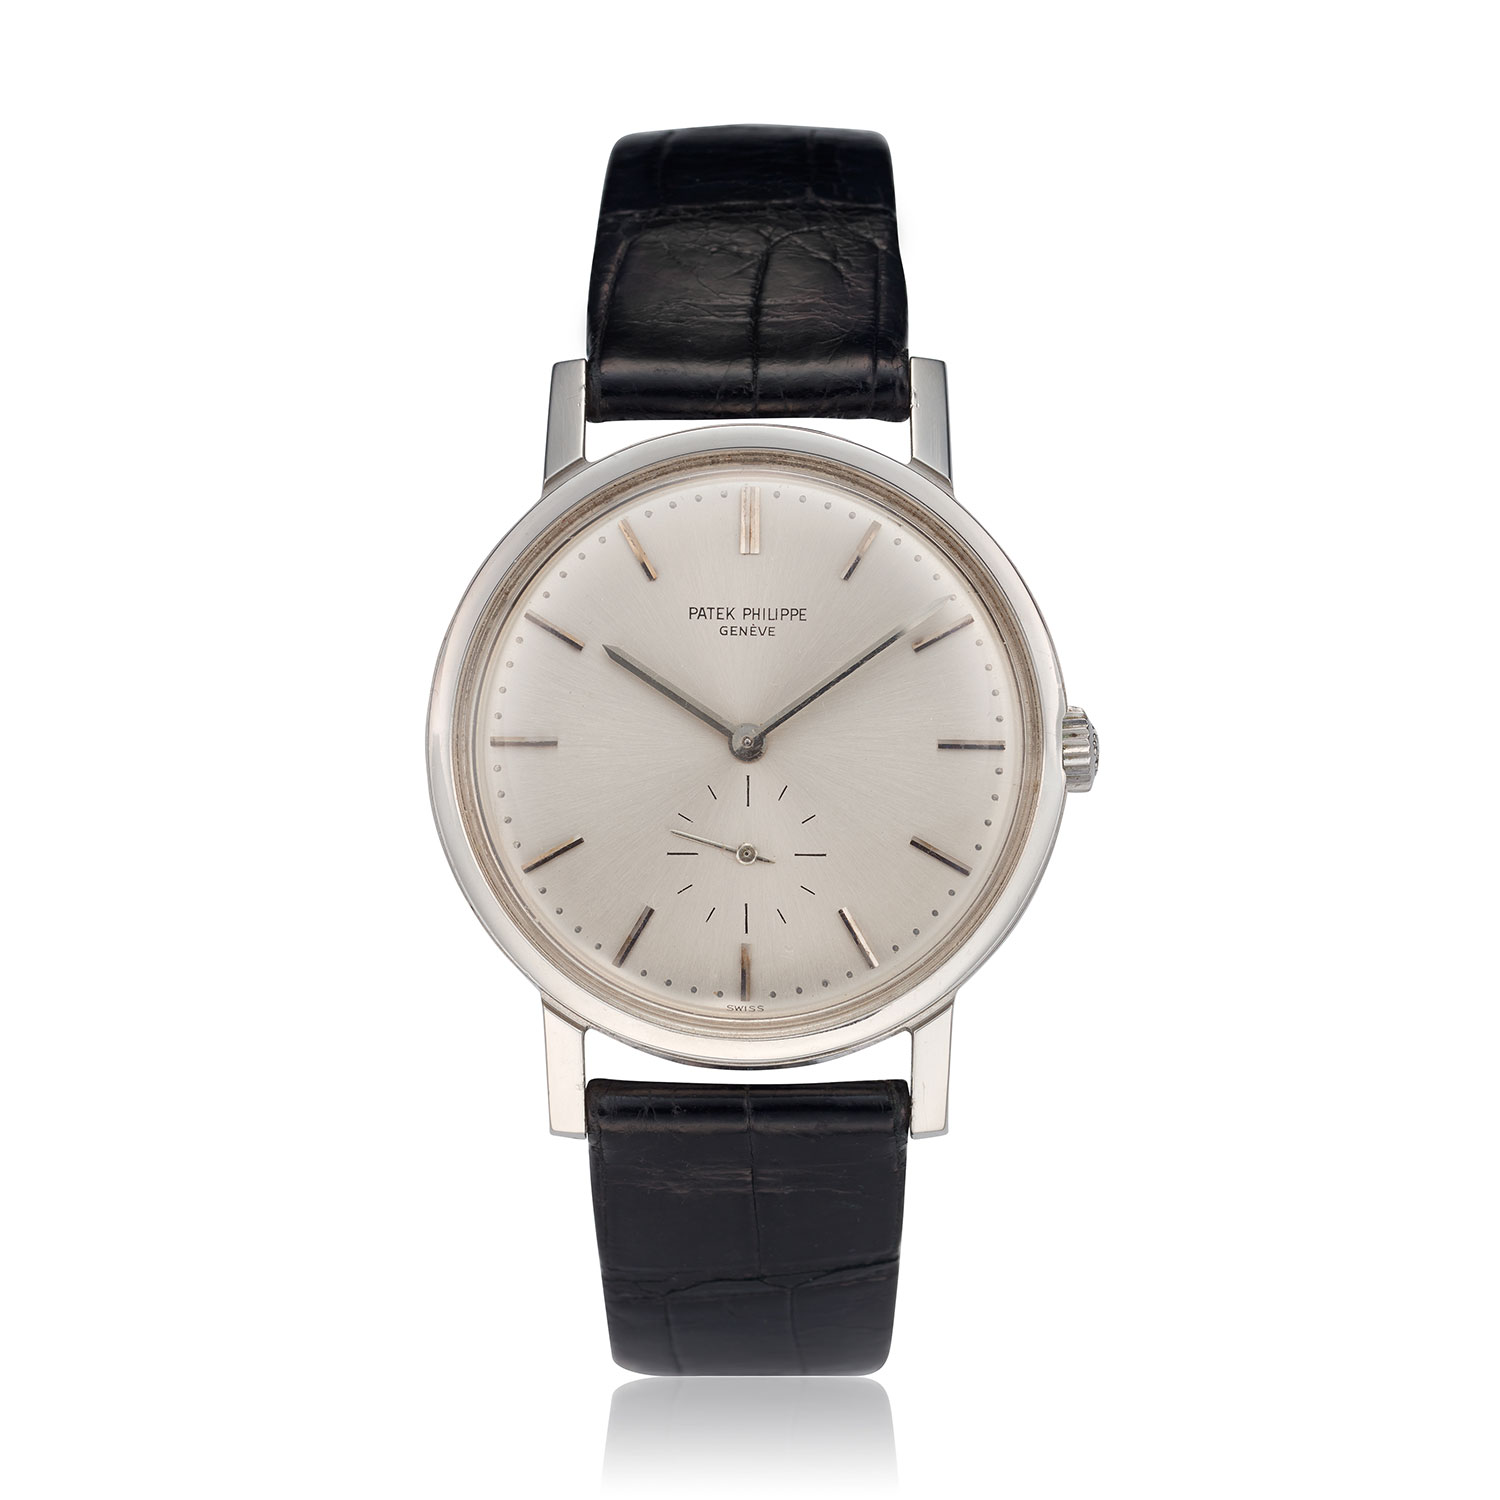 PATEK PHILIPPE STAINLESS STEEL REF. 3466A - Collectability